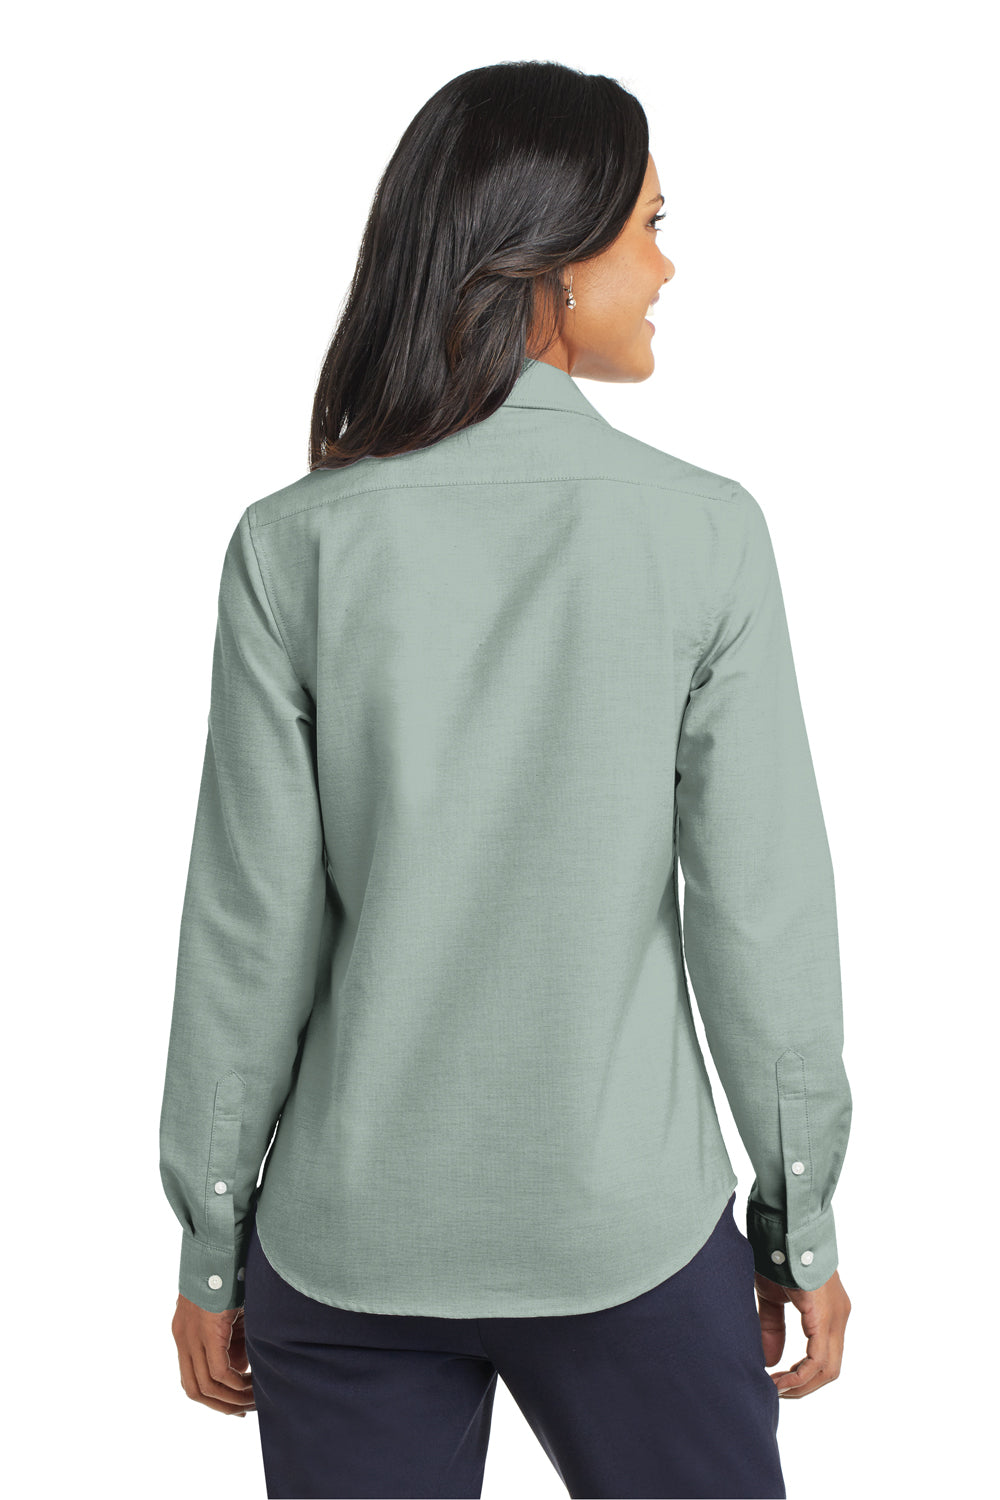 Port Authority L658 Womens SuperPro Oxford Wrinkle Resistant Long Sleeve Button Down Shirt Green Back